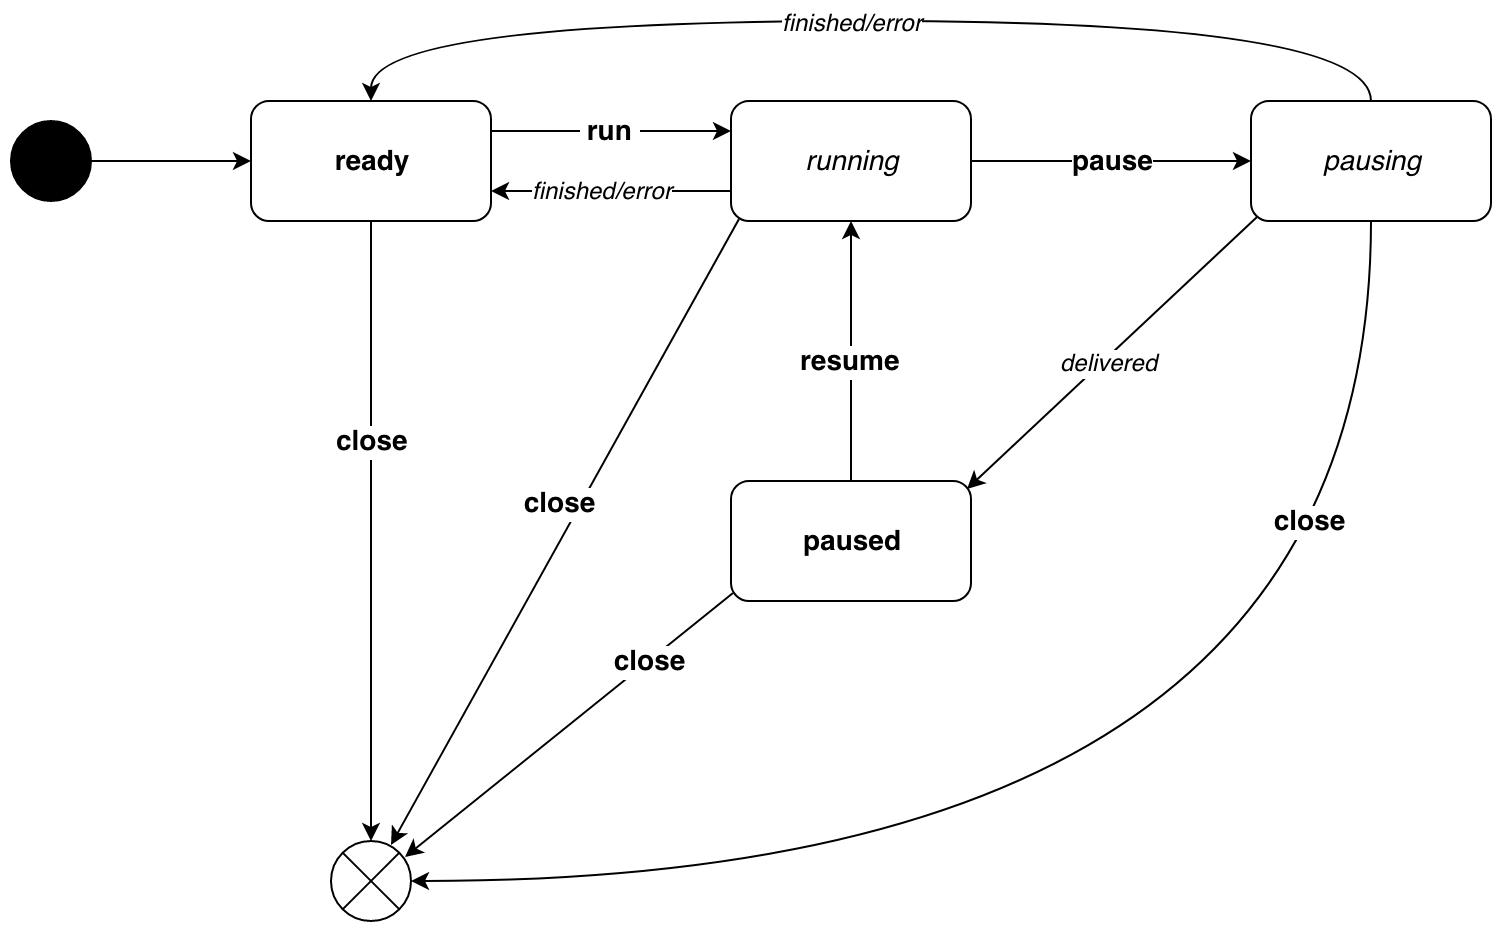 pipe_lifecycle